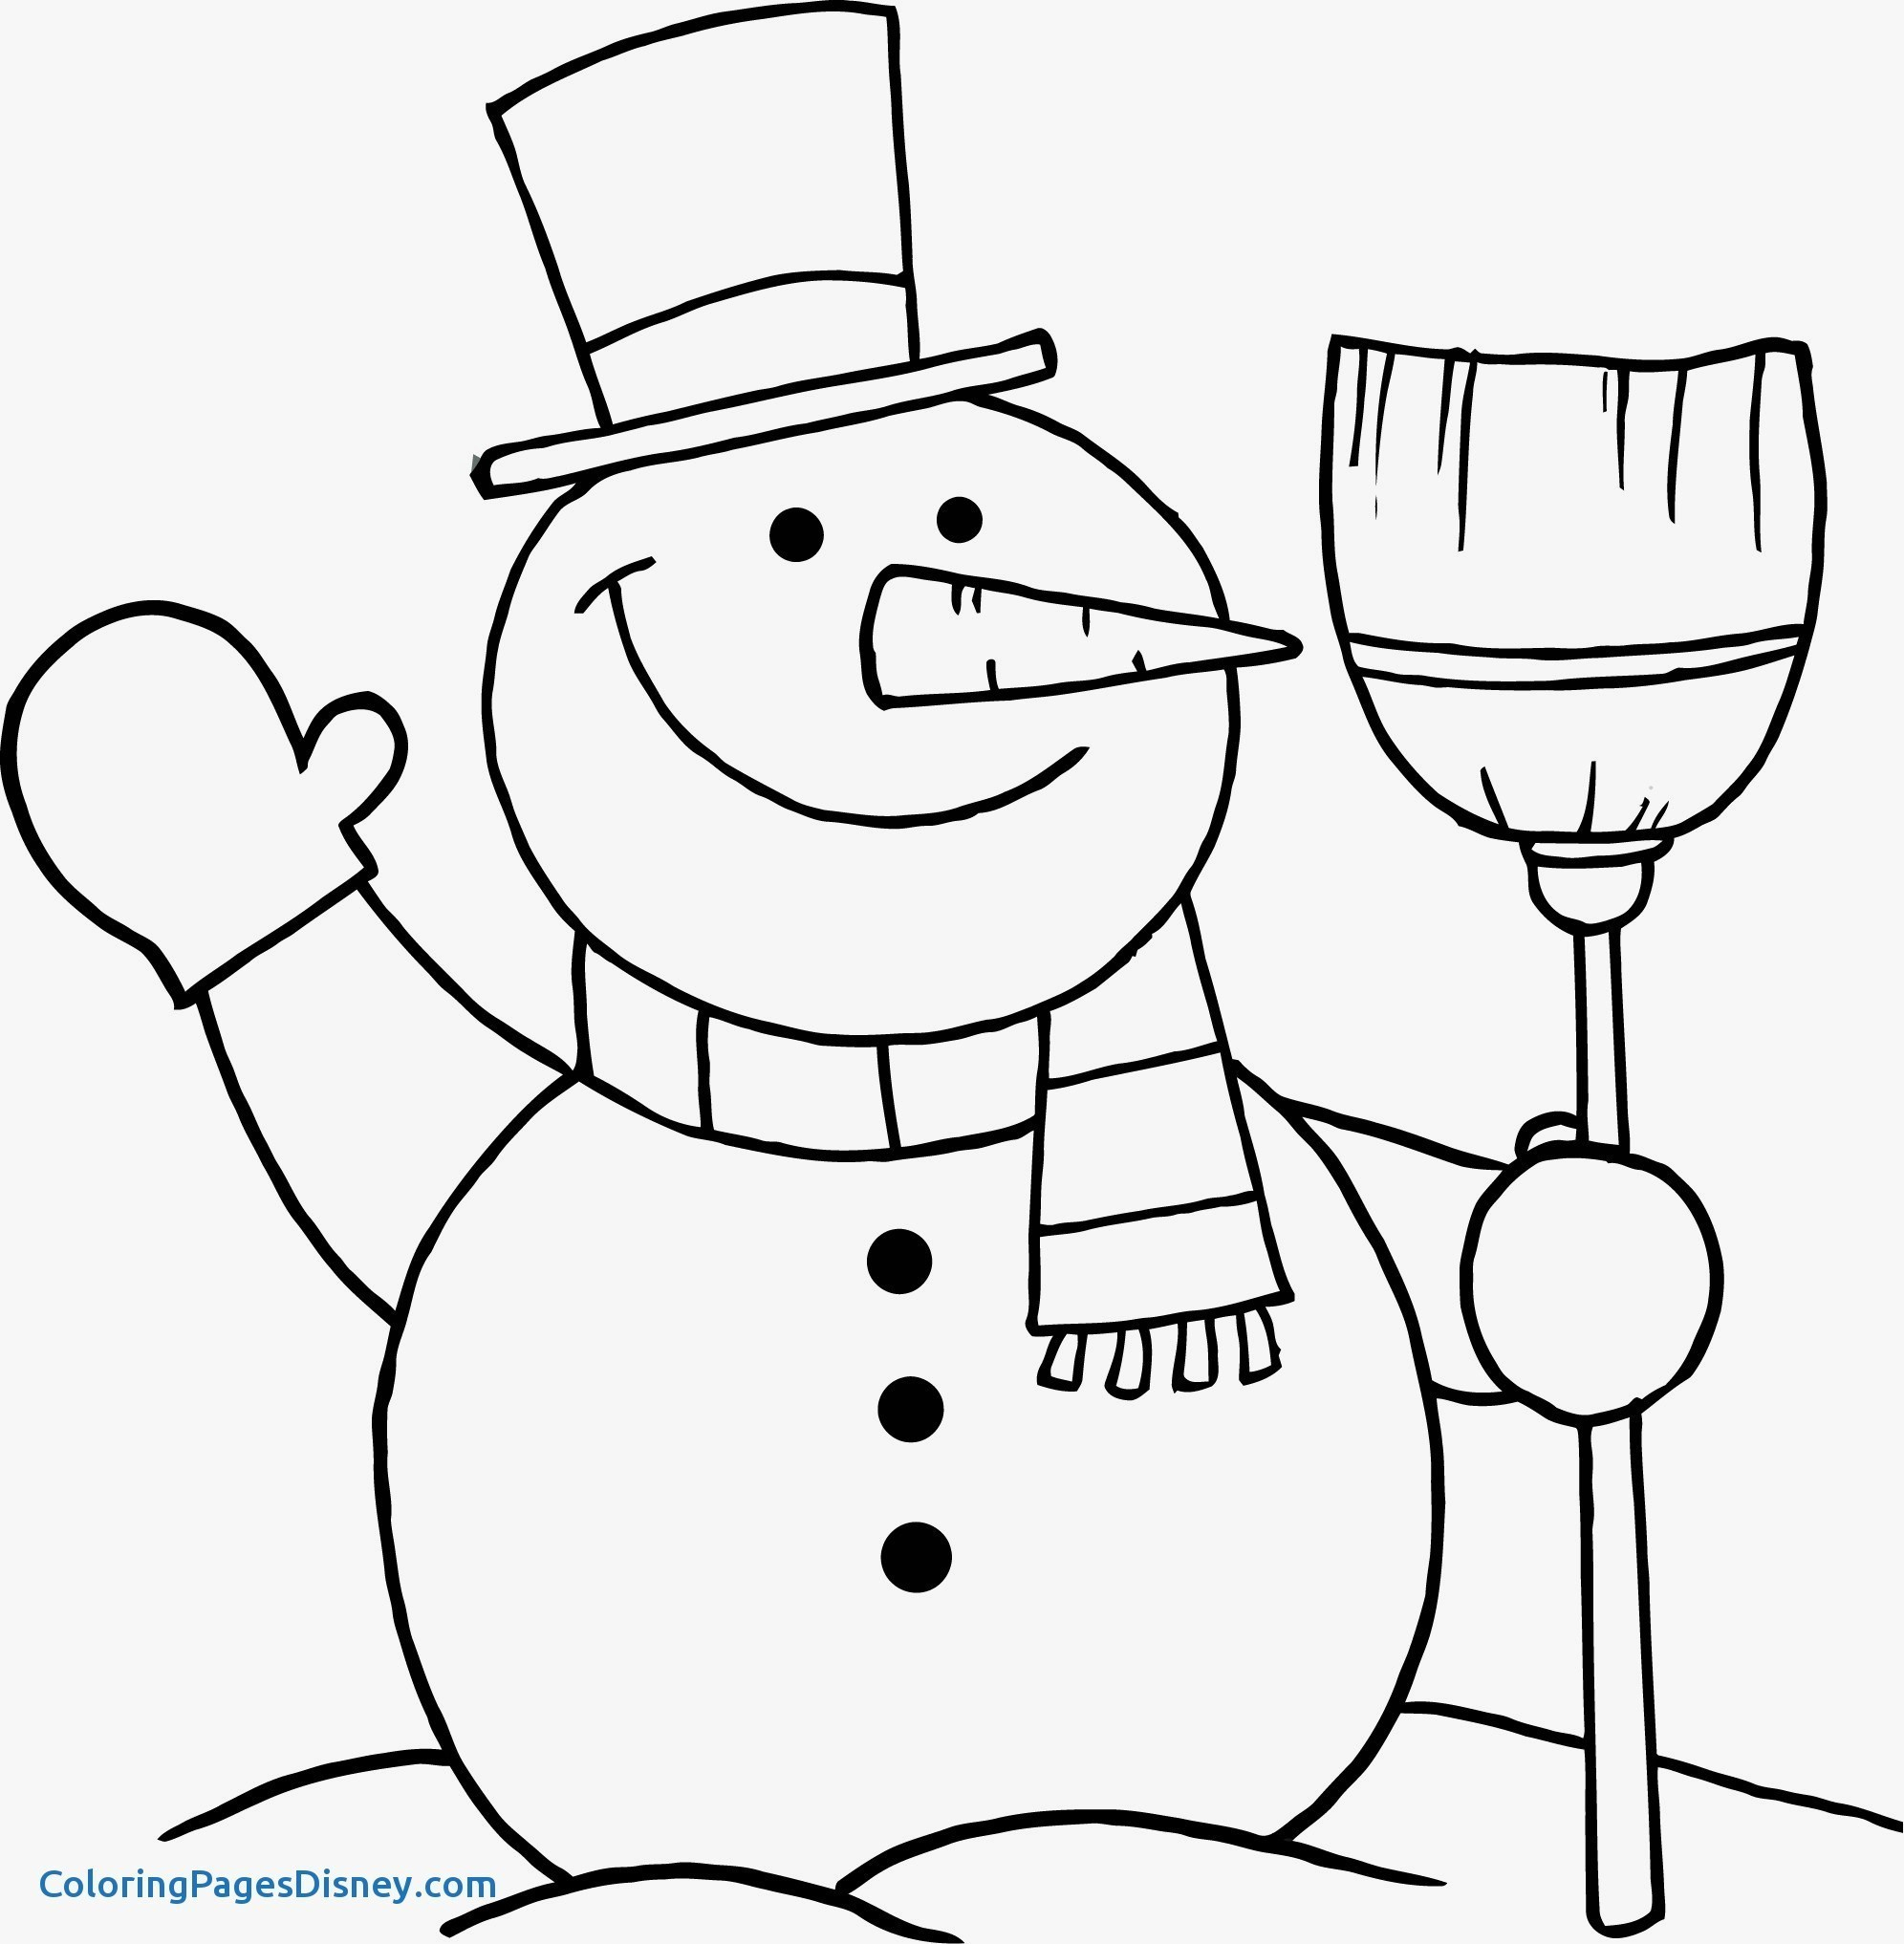 Coloring Pages Of Snowmen New Snowman Coloring Pages Theyesyesyalls